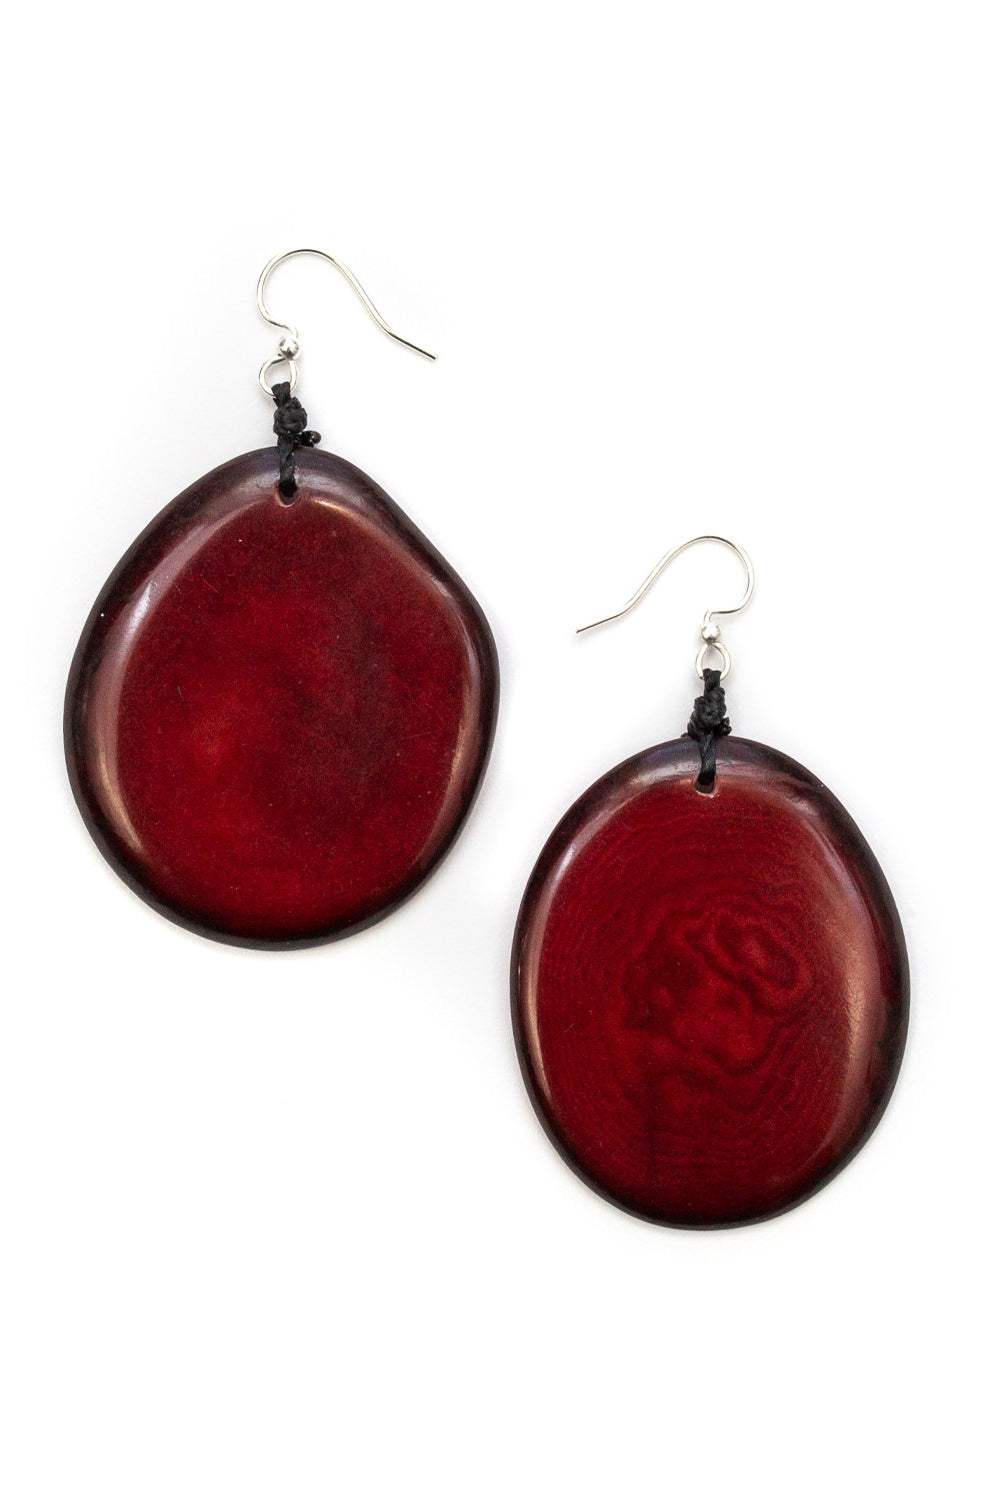 Organic Tague Jewelry (1E250) Drop earrings made from organic tagua nut slices in burgundy